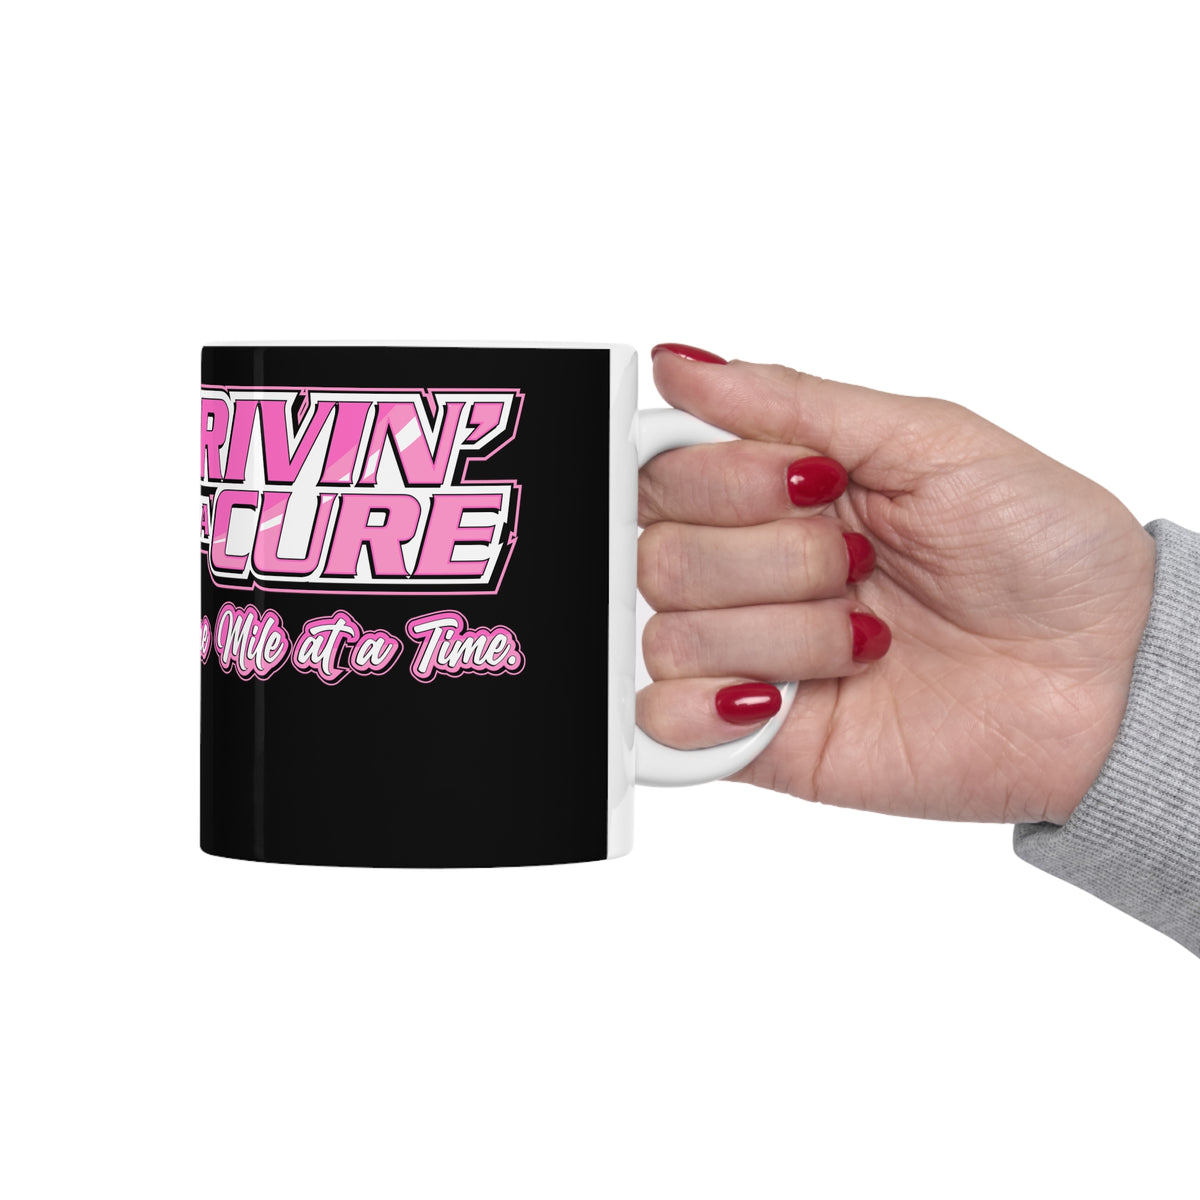 Breast Cancer - Drivin' for a Cure - Peterbilt - Ceramic Mug 11oz - Free Shipping